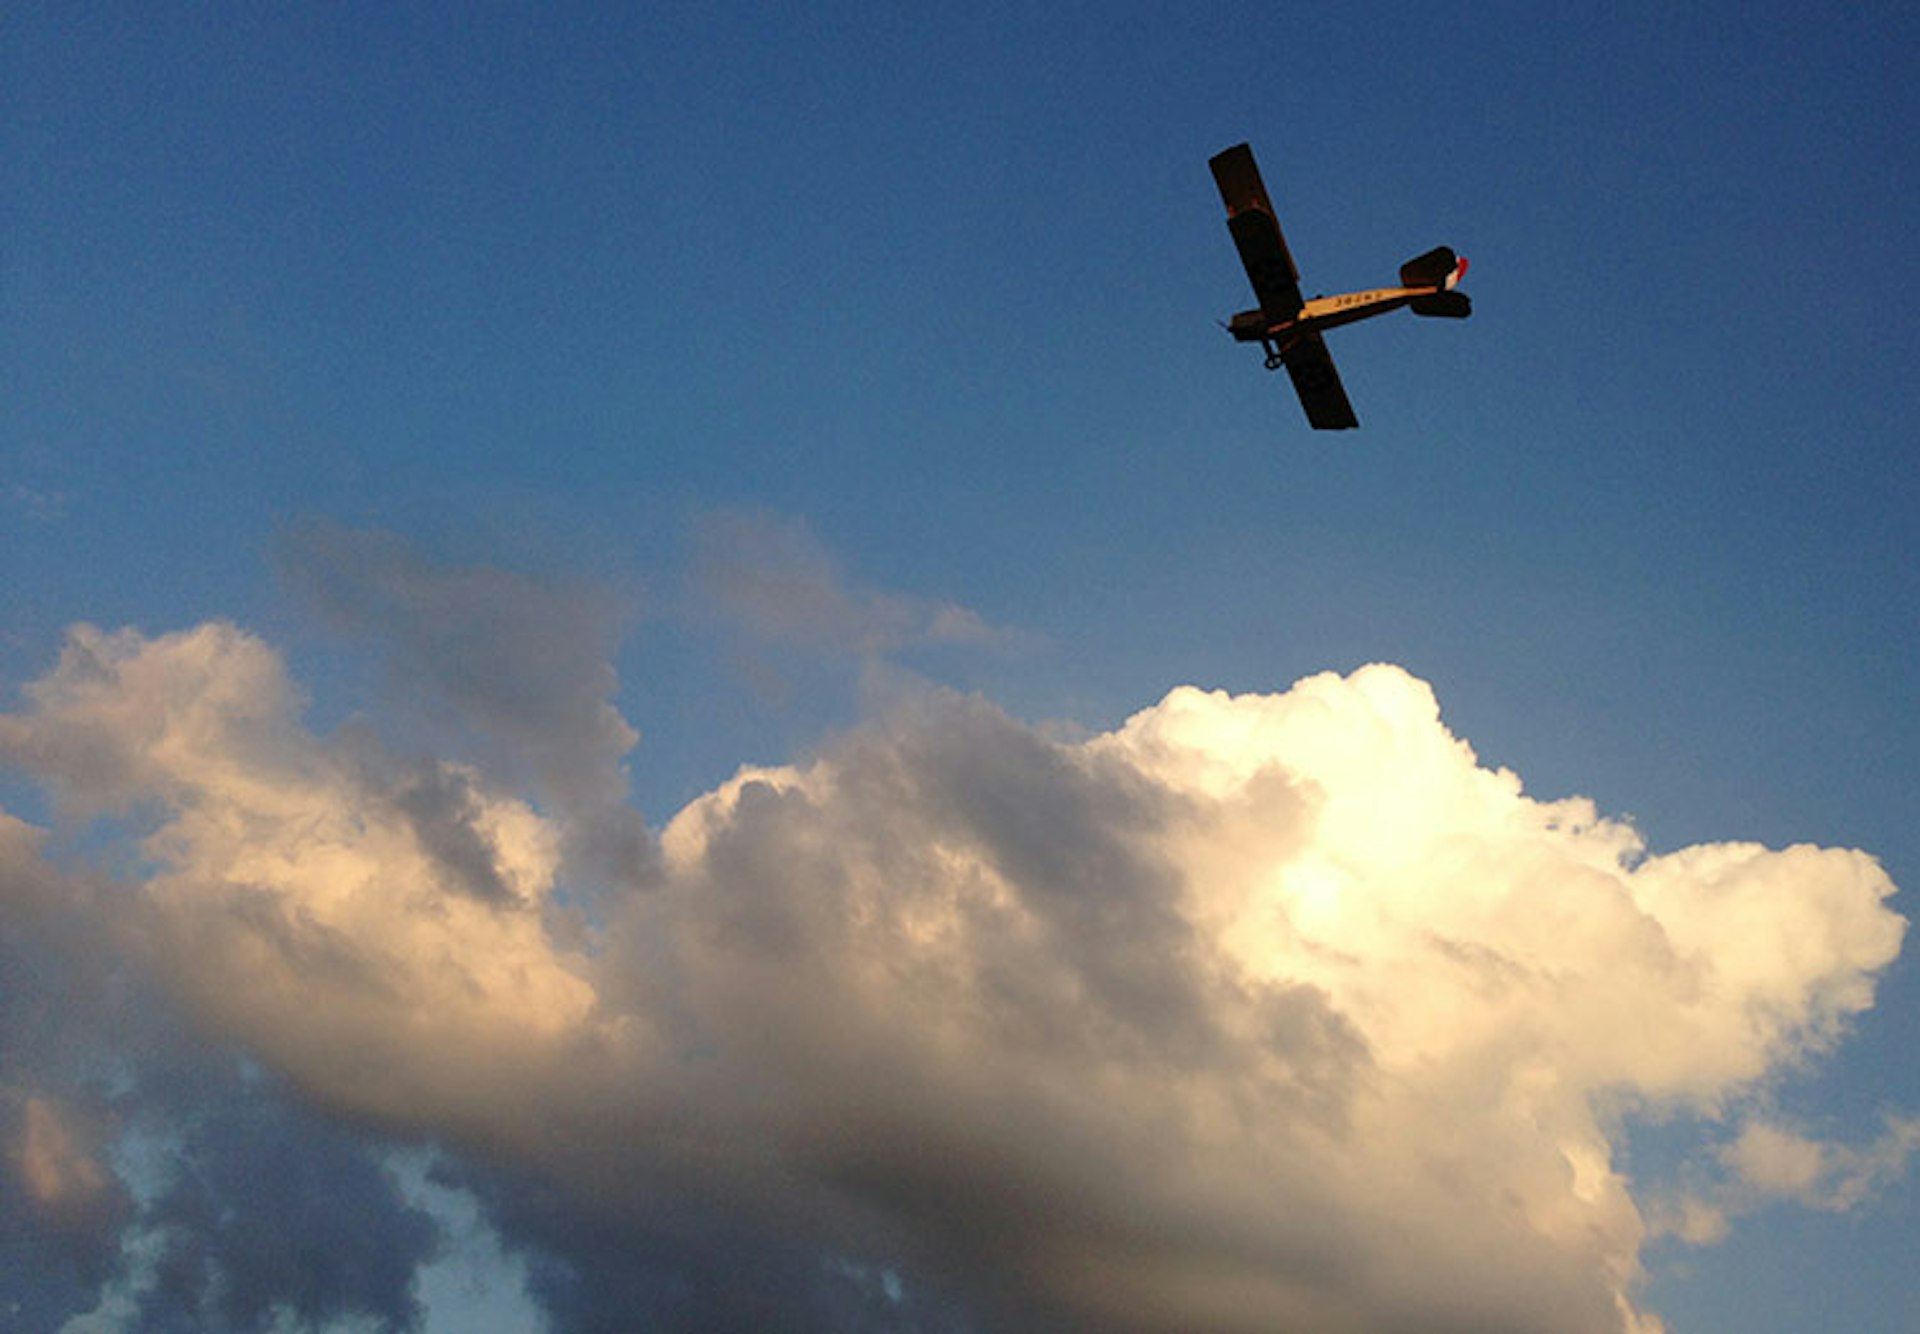 The restored Curtiss Jenny soars above the clouds. Image courtesy of Friends of Jenny